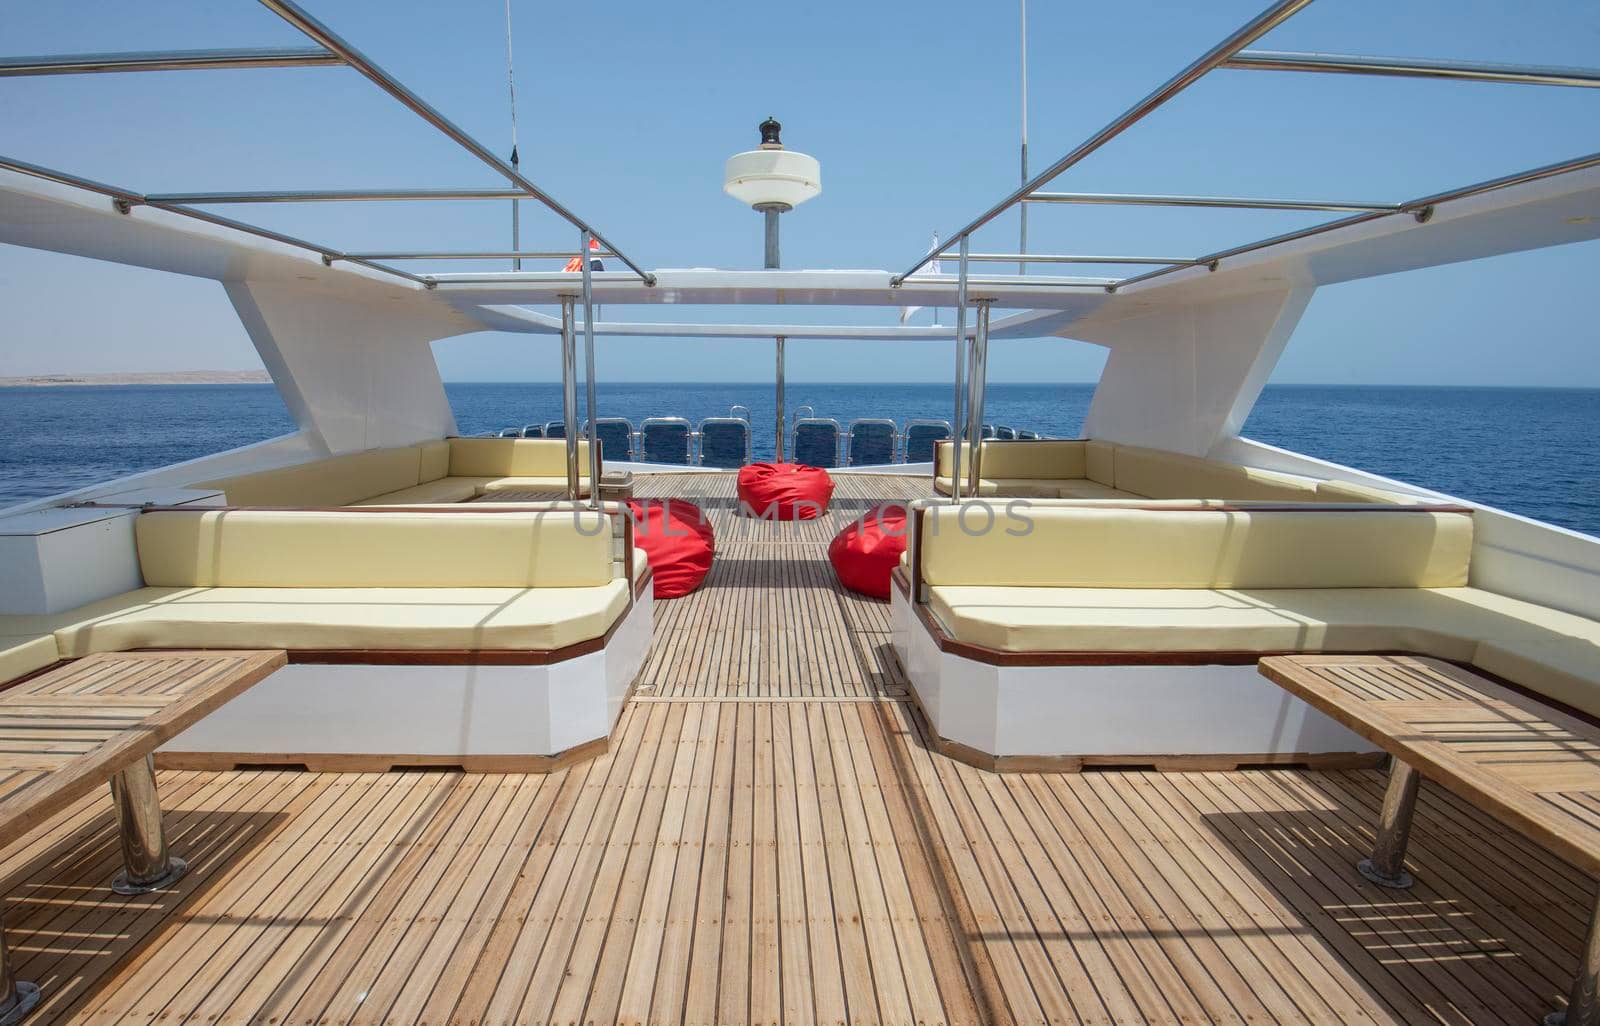 Table and chairs on sundeck of a luxury motor yacht by paulvinten